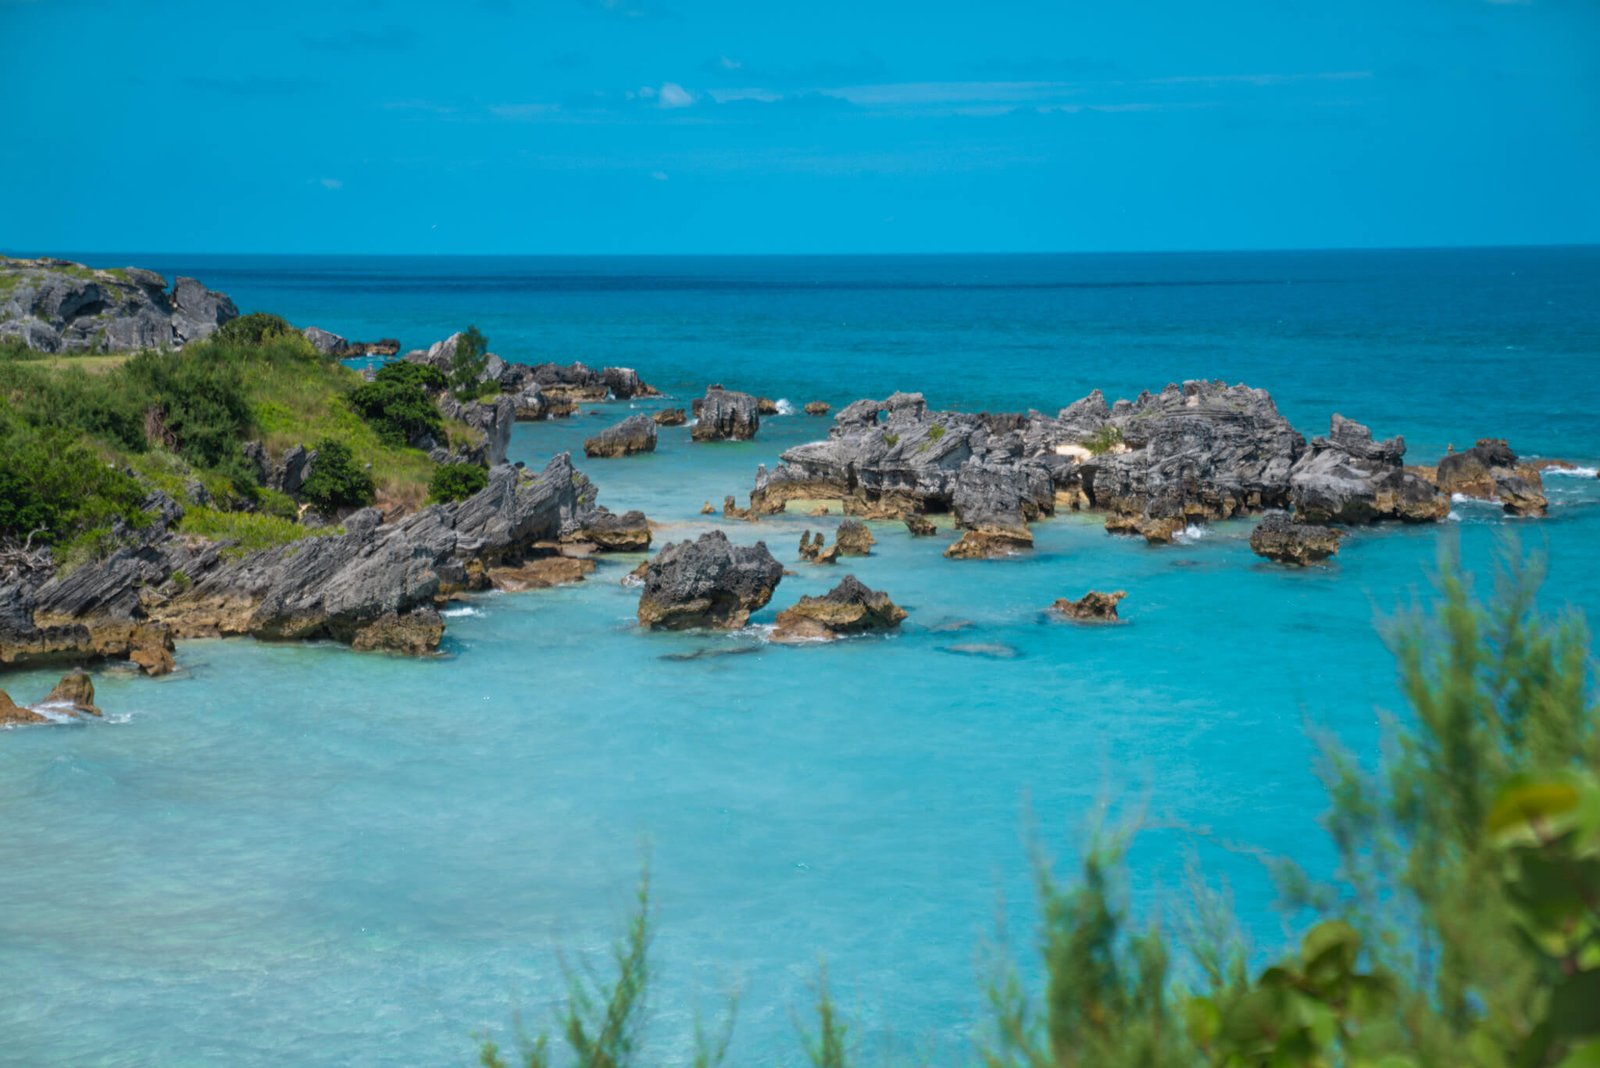 Tobacco Bay, things to do in Bermuda on a cruise